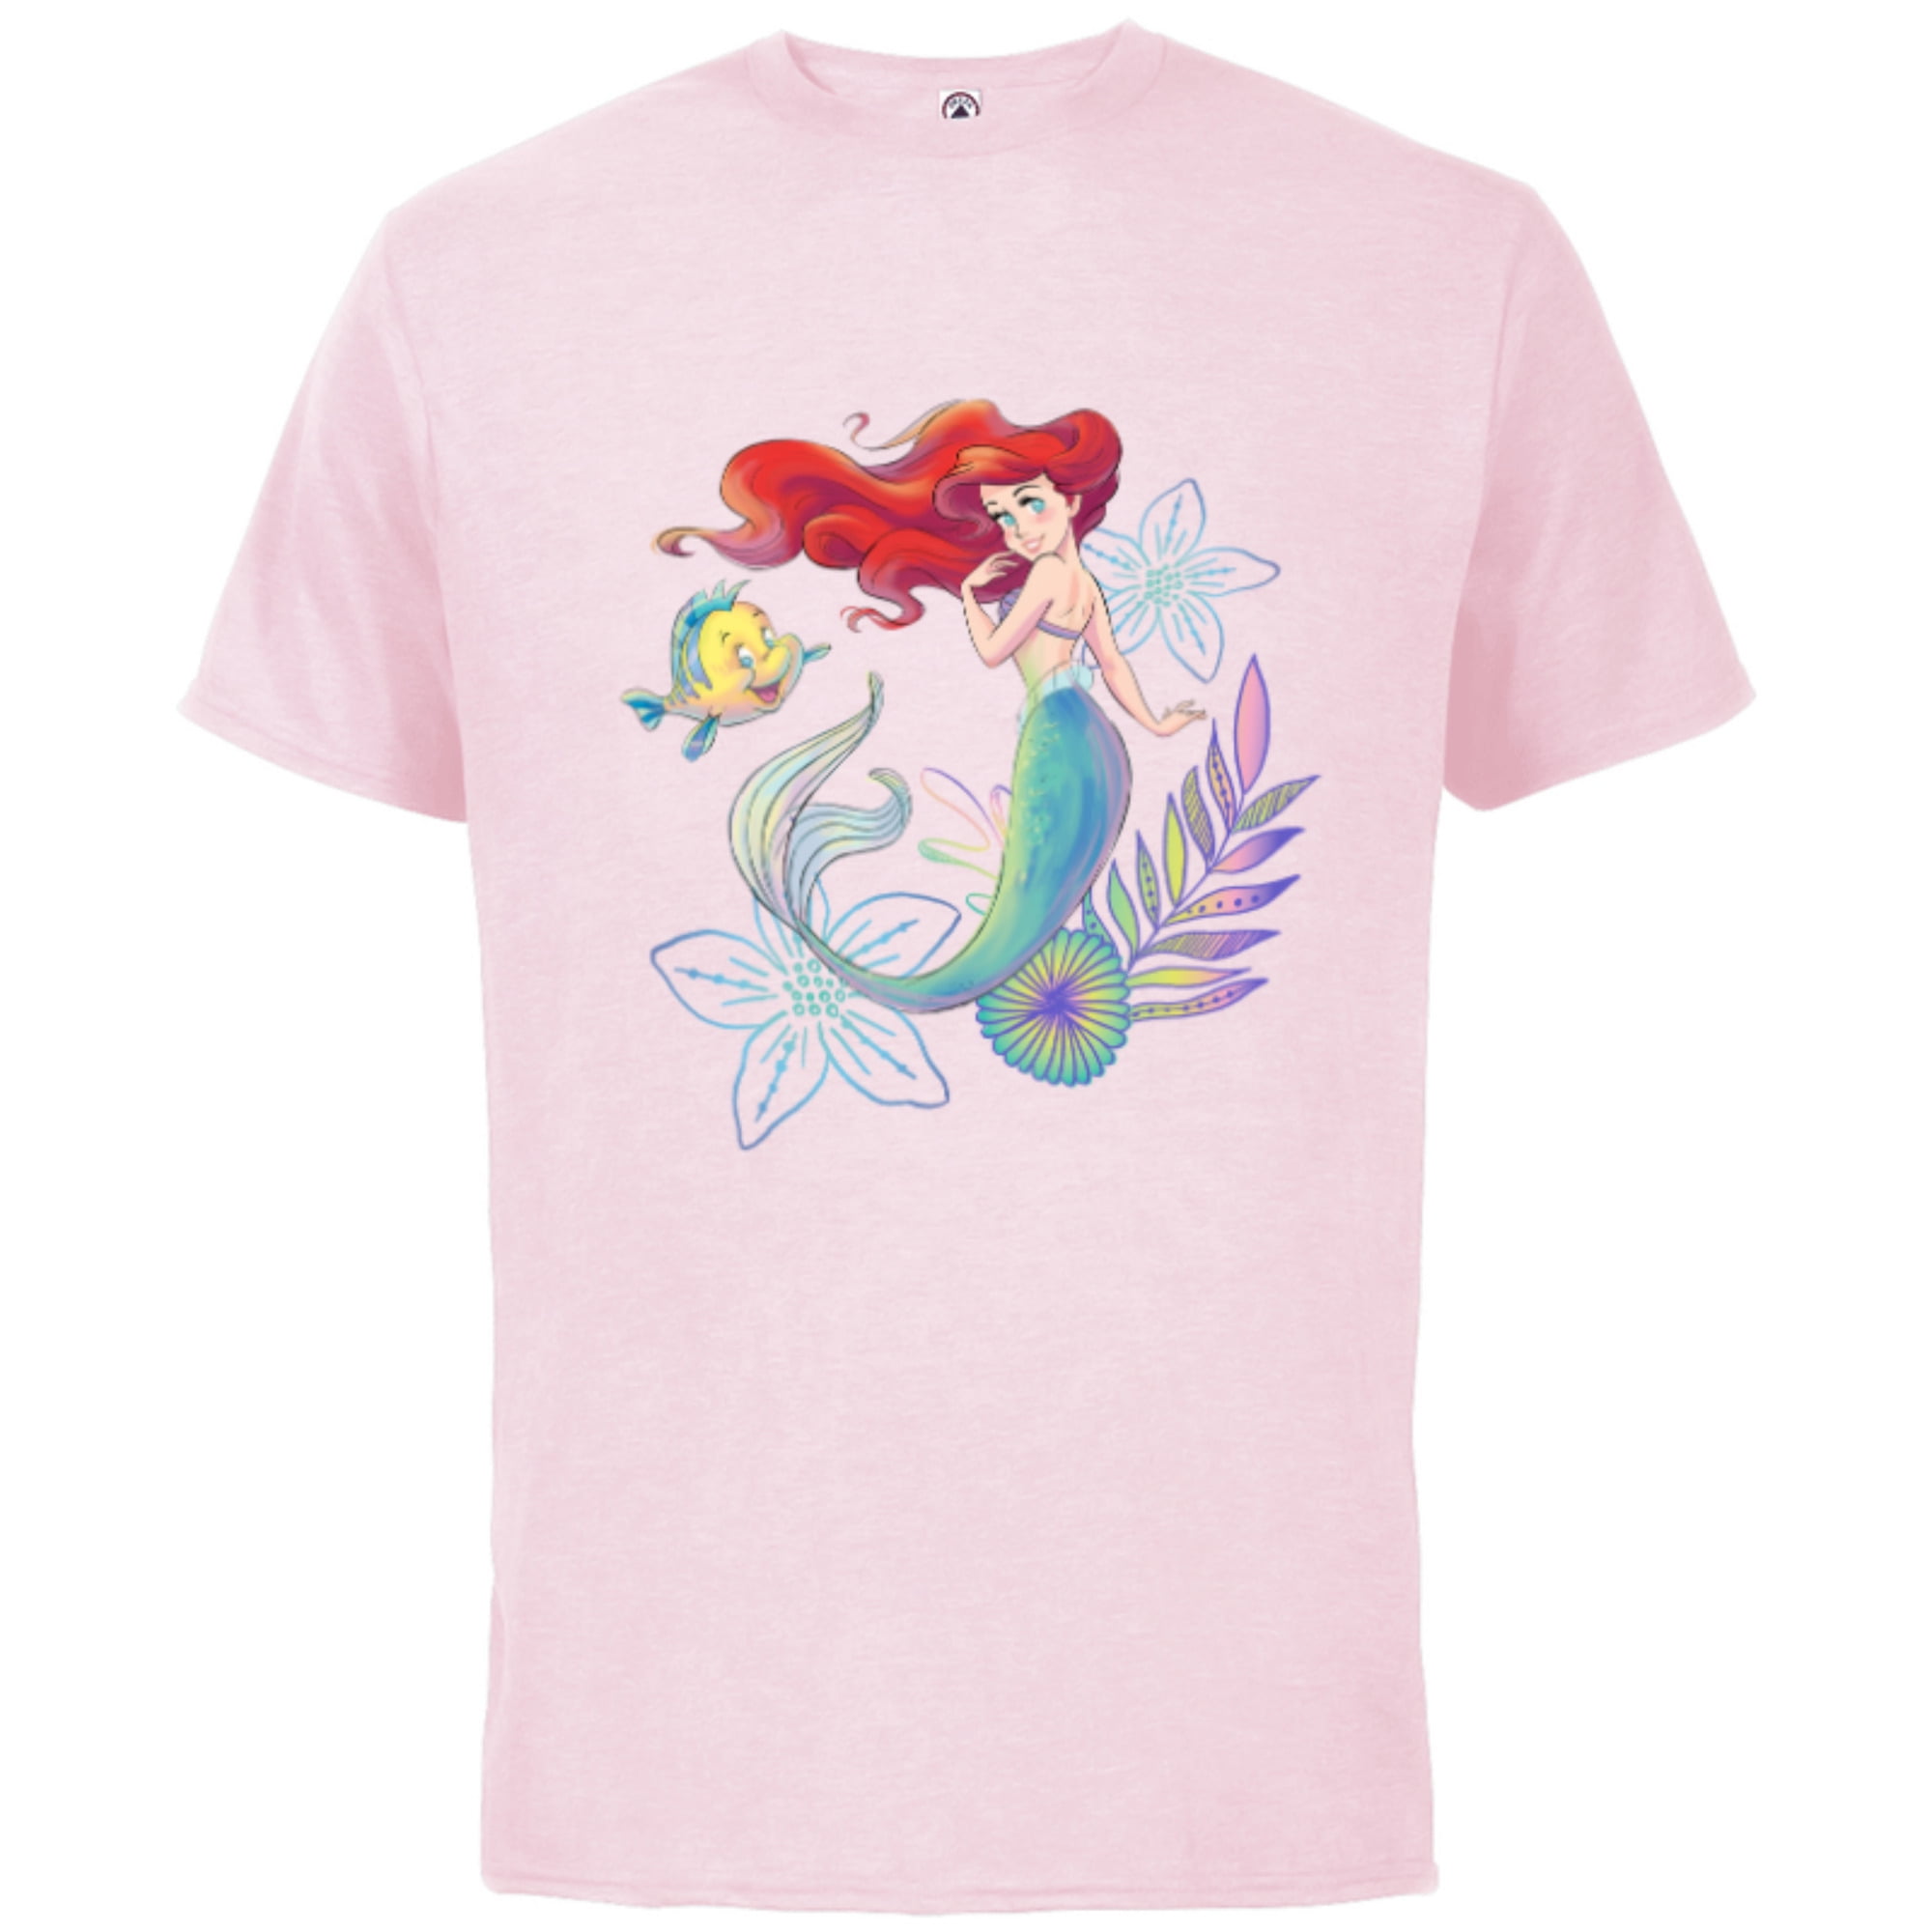 Disney The Little Mermaid Ariel and Flounder Sea - Short Sleeve Cotton T- Shirt for Adults -Customized-Soft Pink